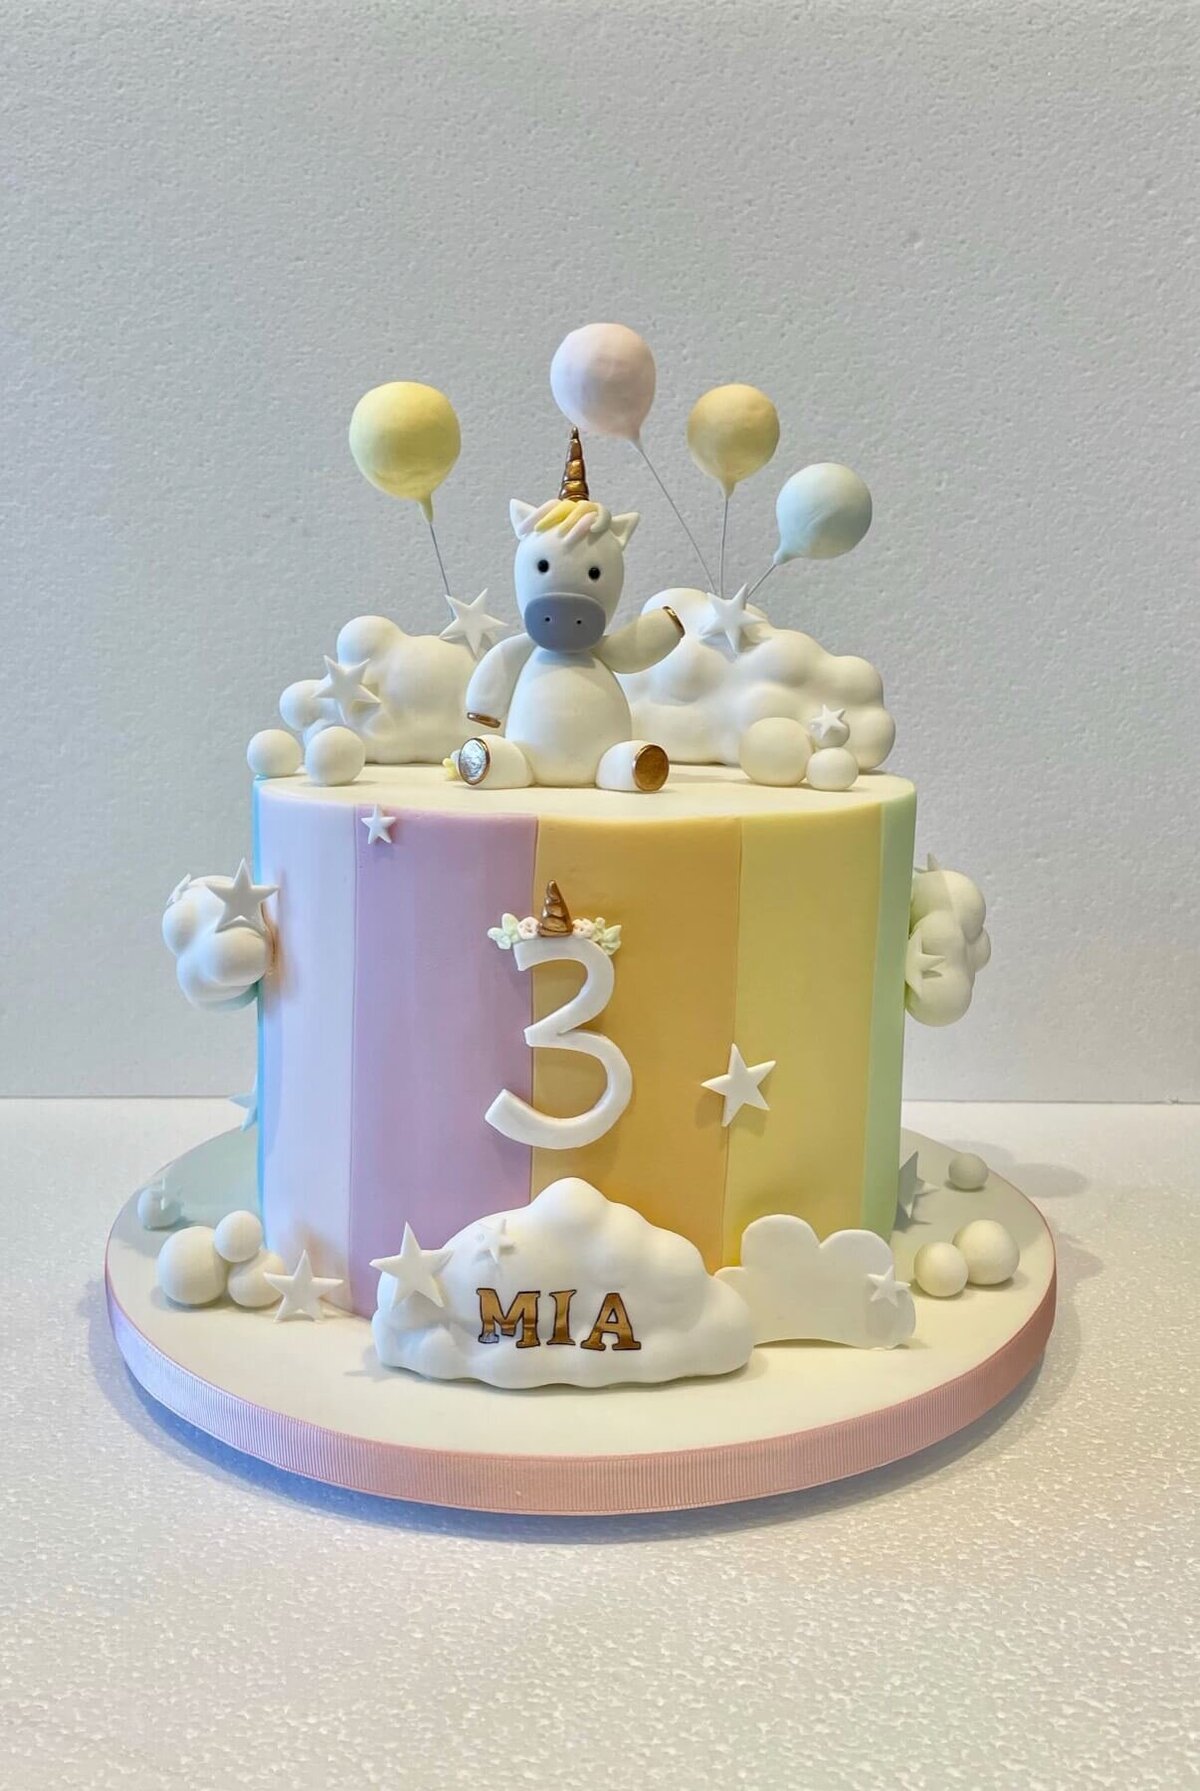 A third birthday cake with a rainbow and clouds theme and a unicorn on top with a party hat and 4 balloons